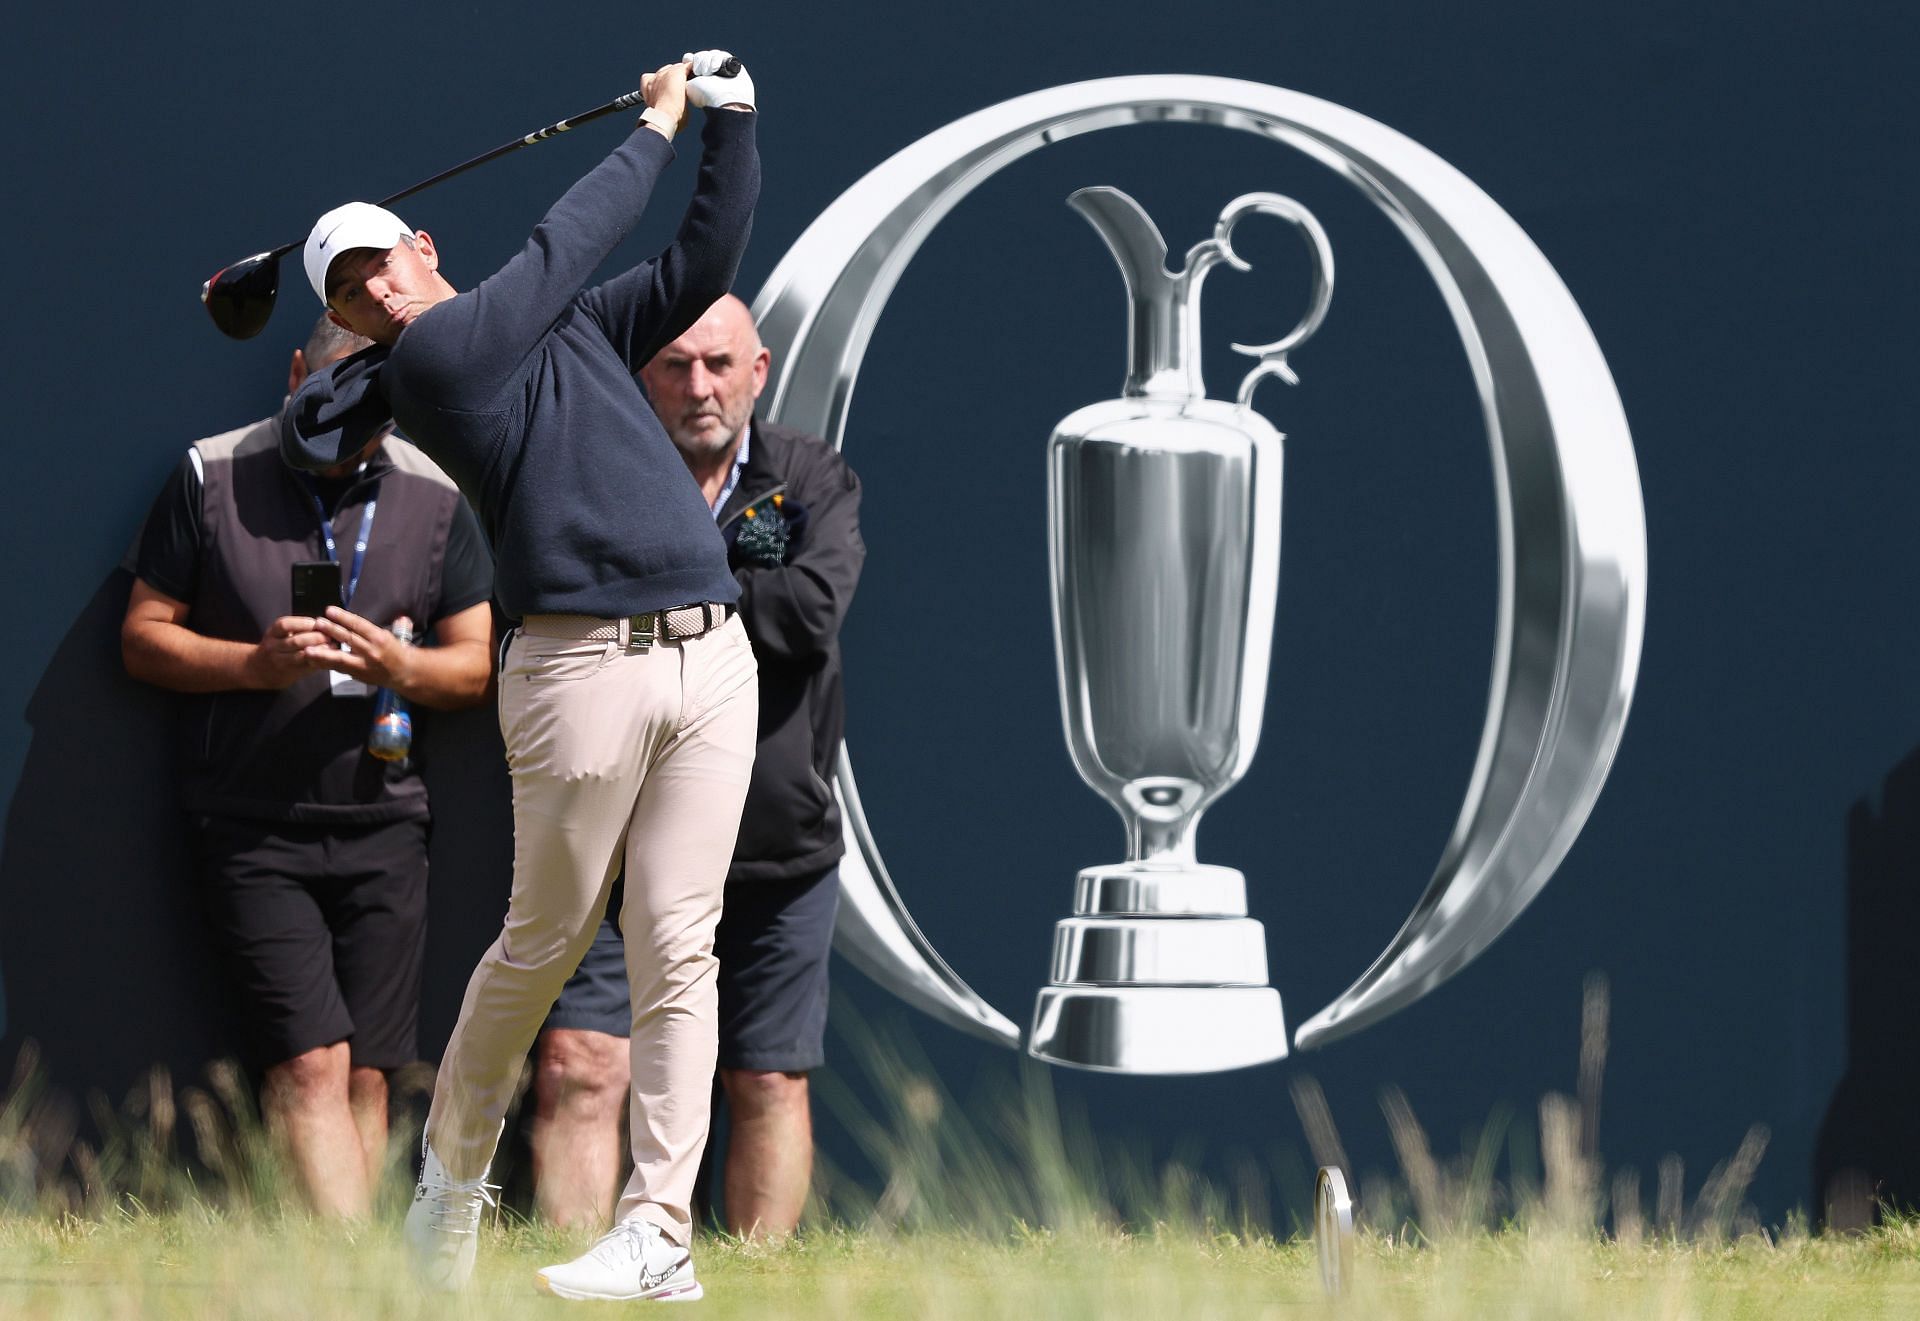 The 151st Open - Preview Day One